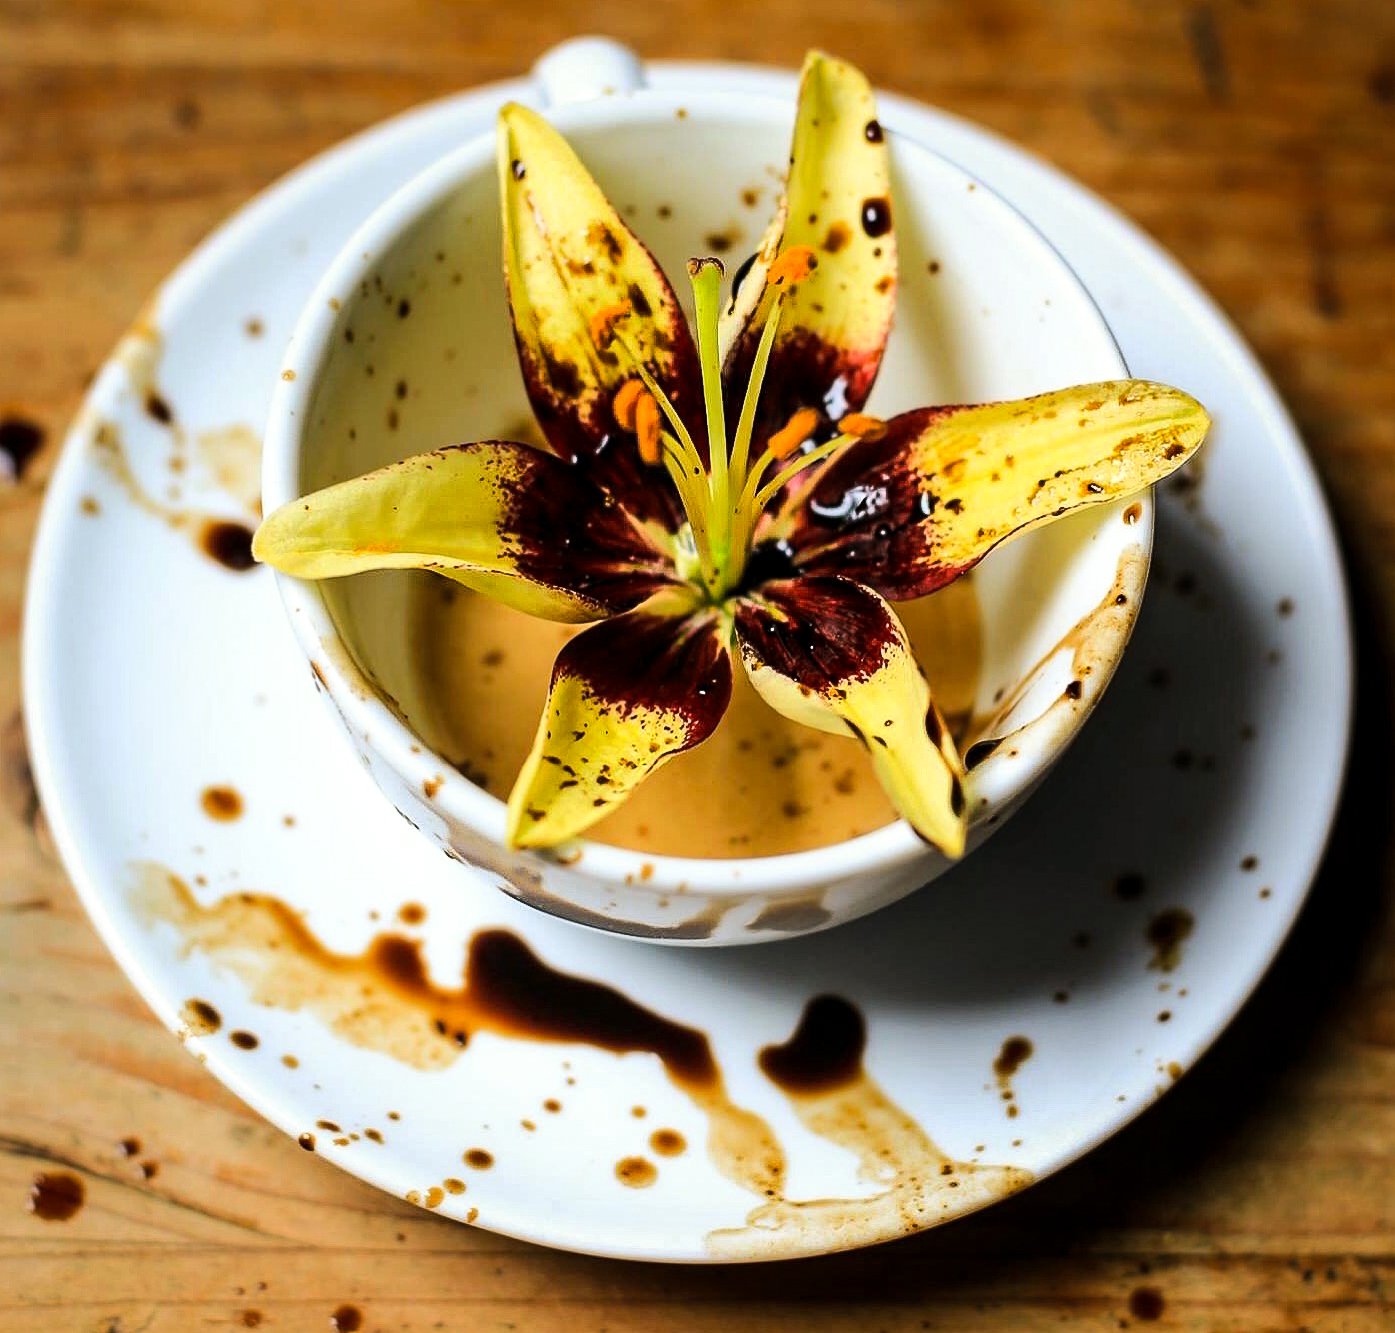 Lily yellow coffee stories and images edited 2019-1.JPG